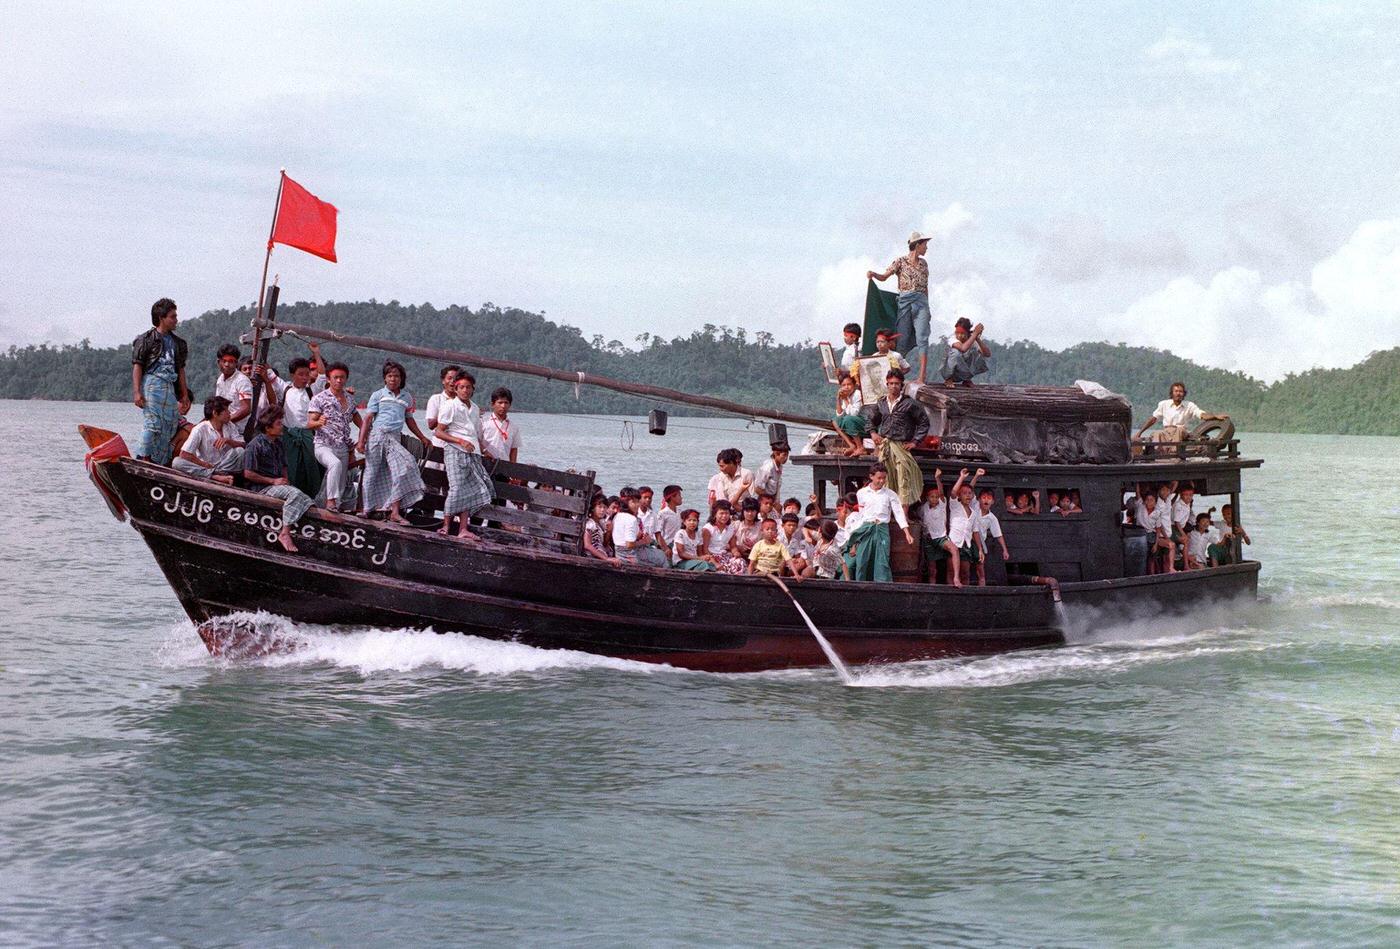 Burmese demonstrators on their way to Victoria Point, an area controlled by anti-government protesters, 1988.